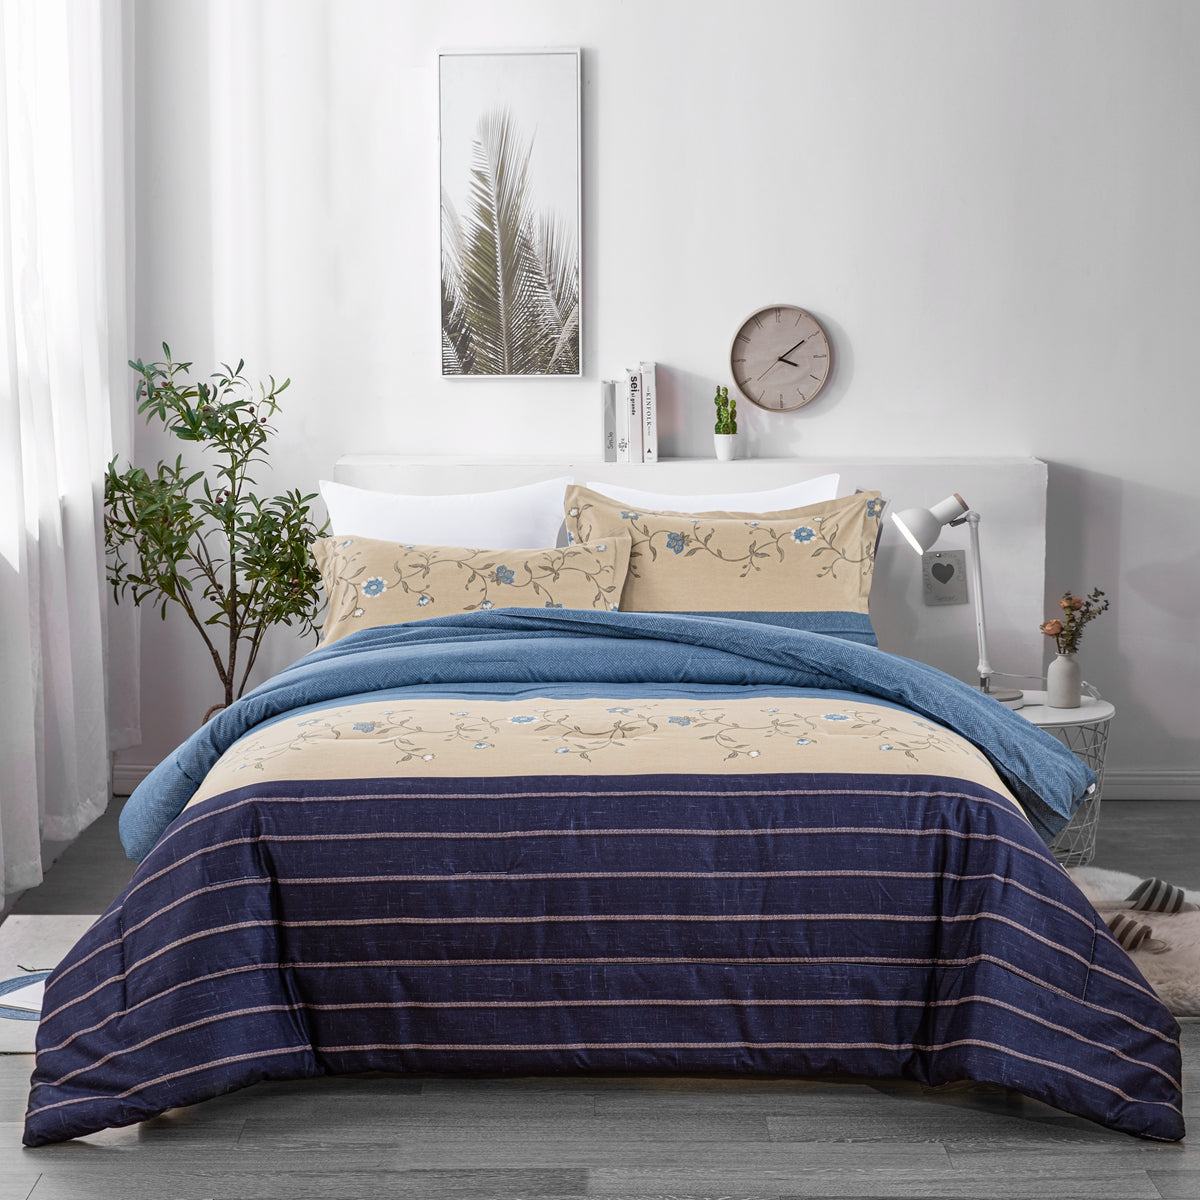 Plain and Simple Style 7 Pieces Comforter Set With 4 Pillows